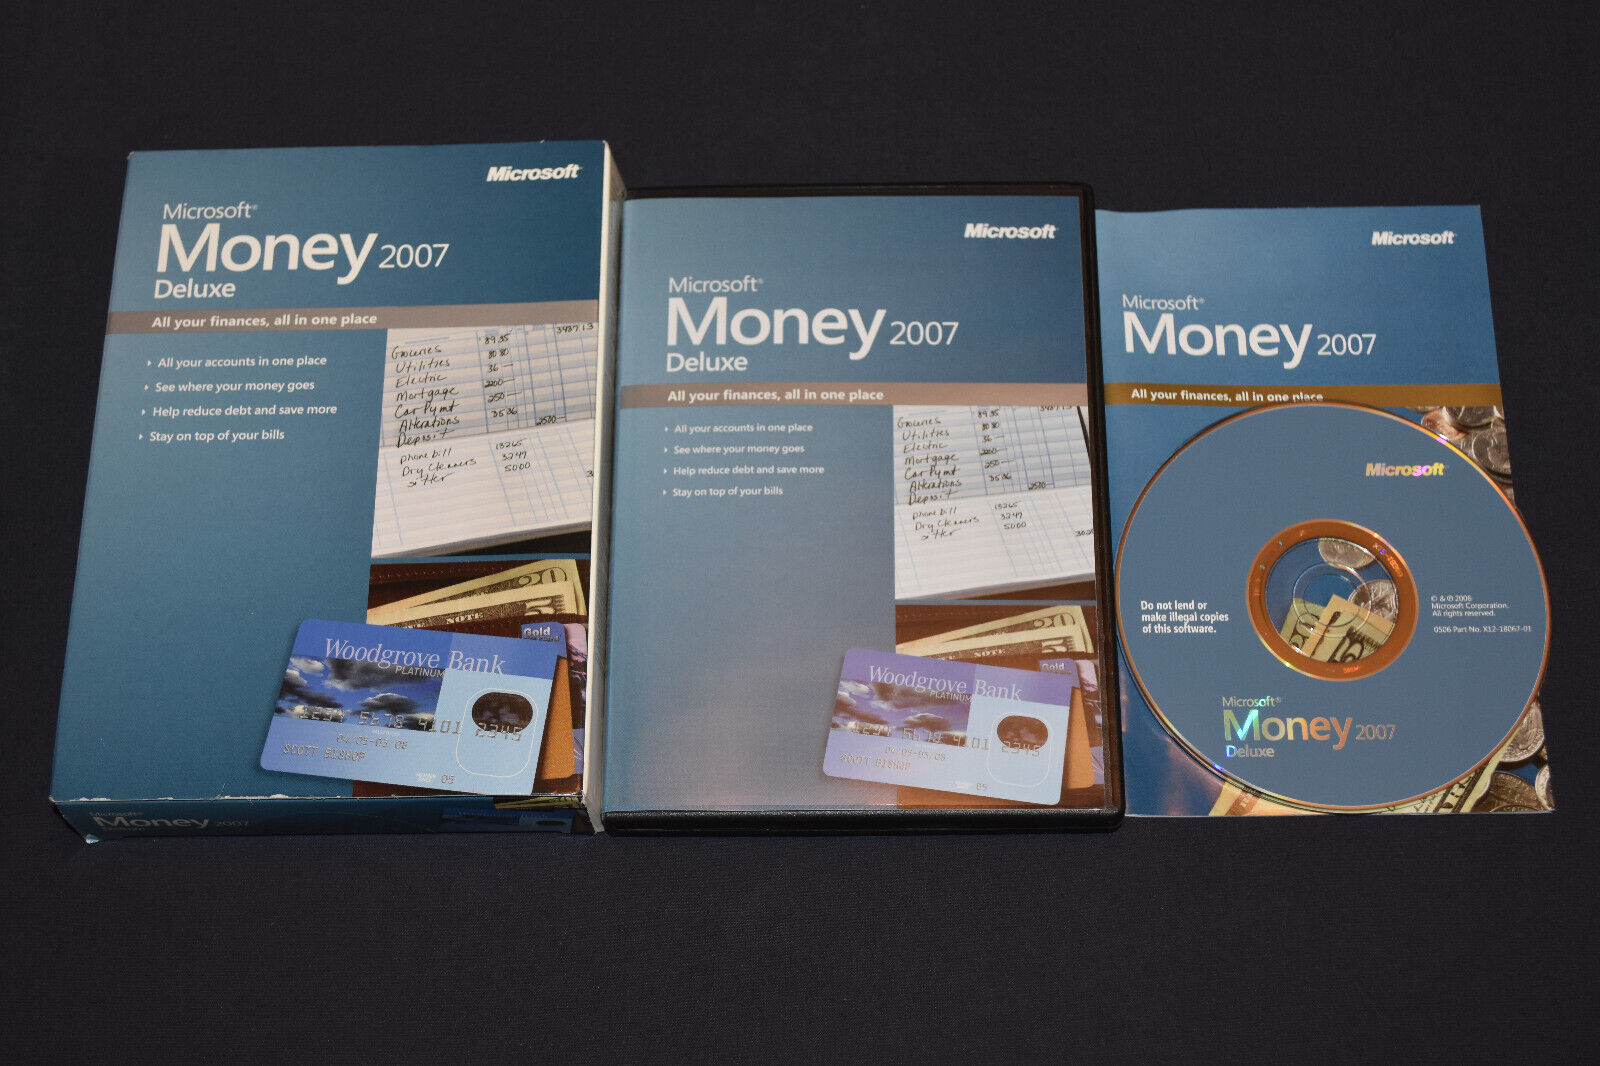 Microsoft Money 2007 Deluxe for Windows - with Case + Outer Box